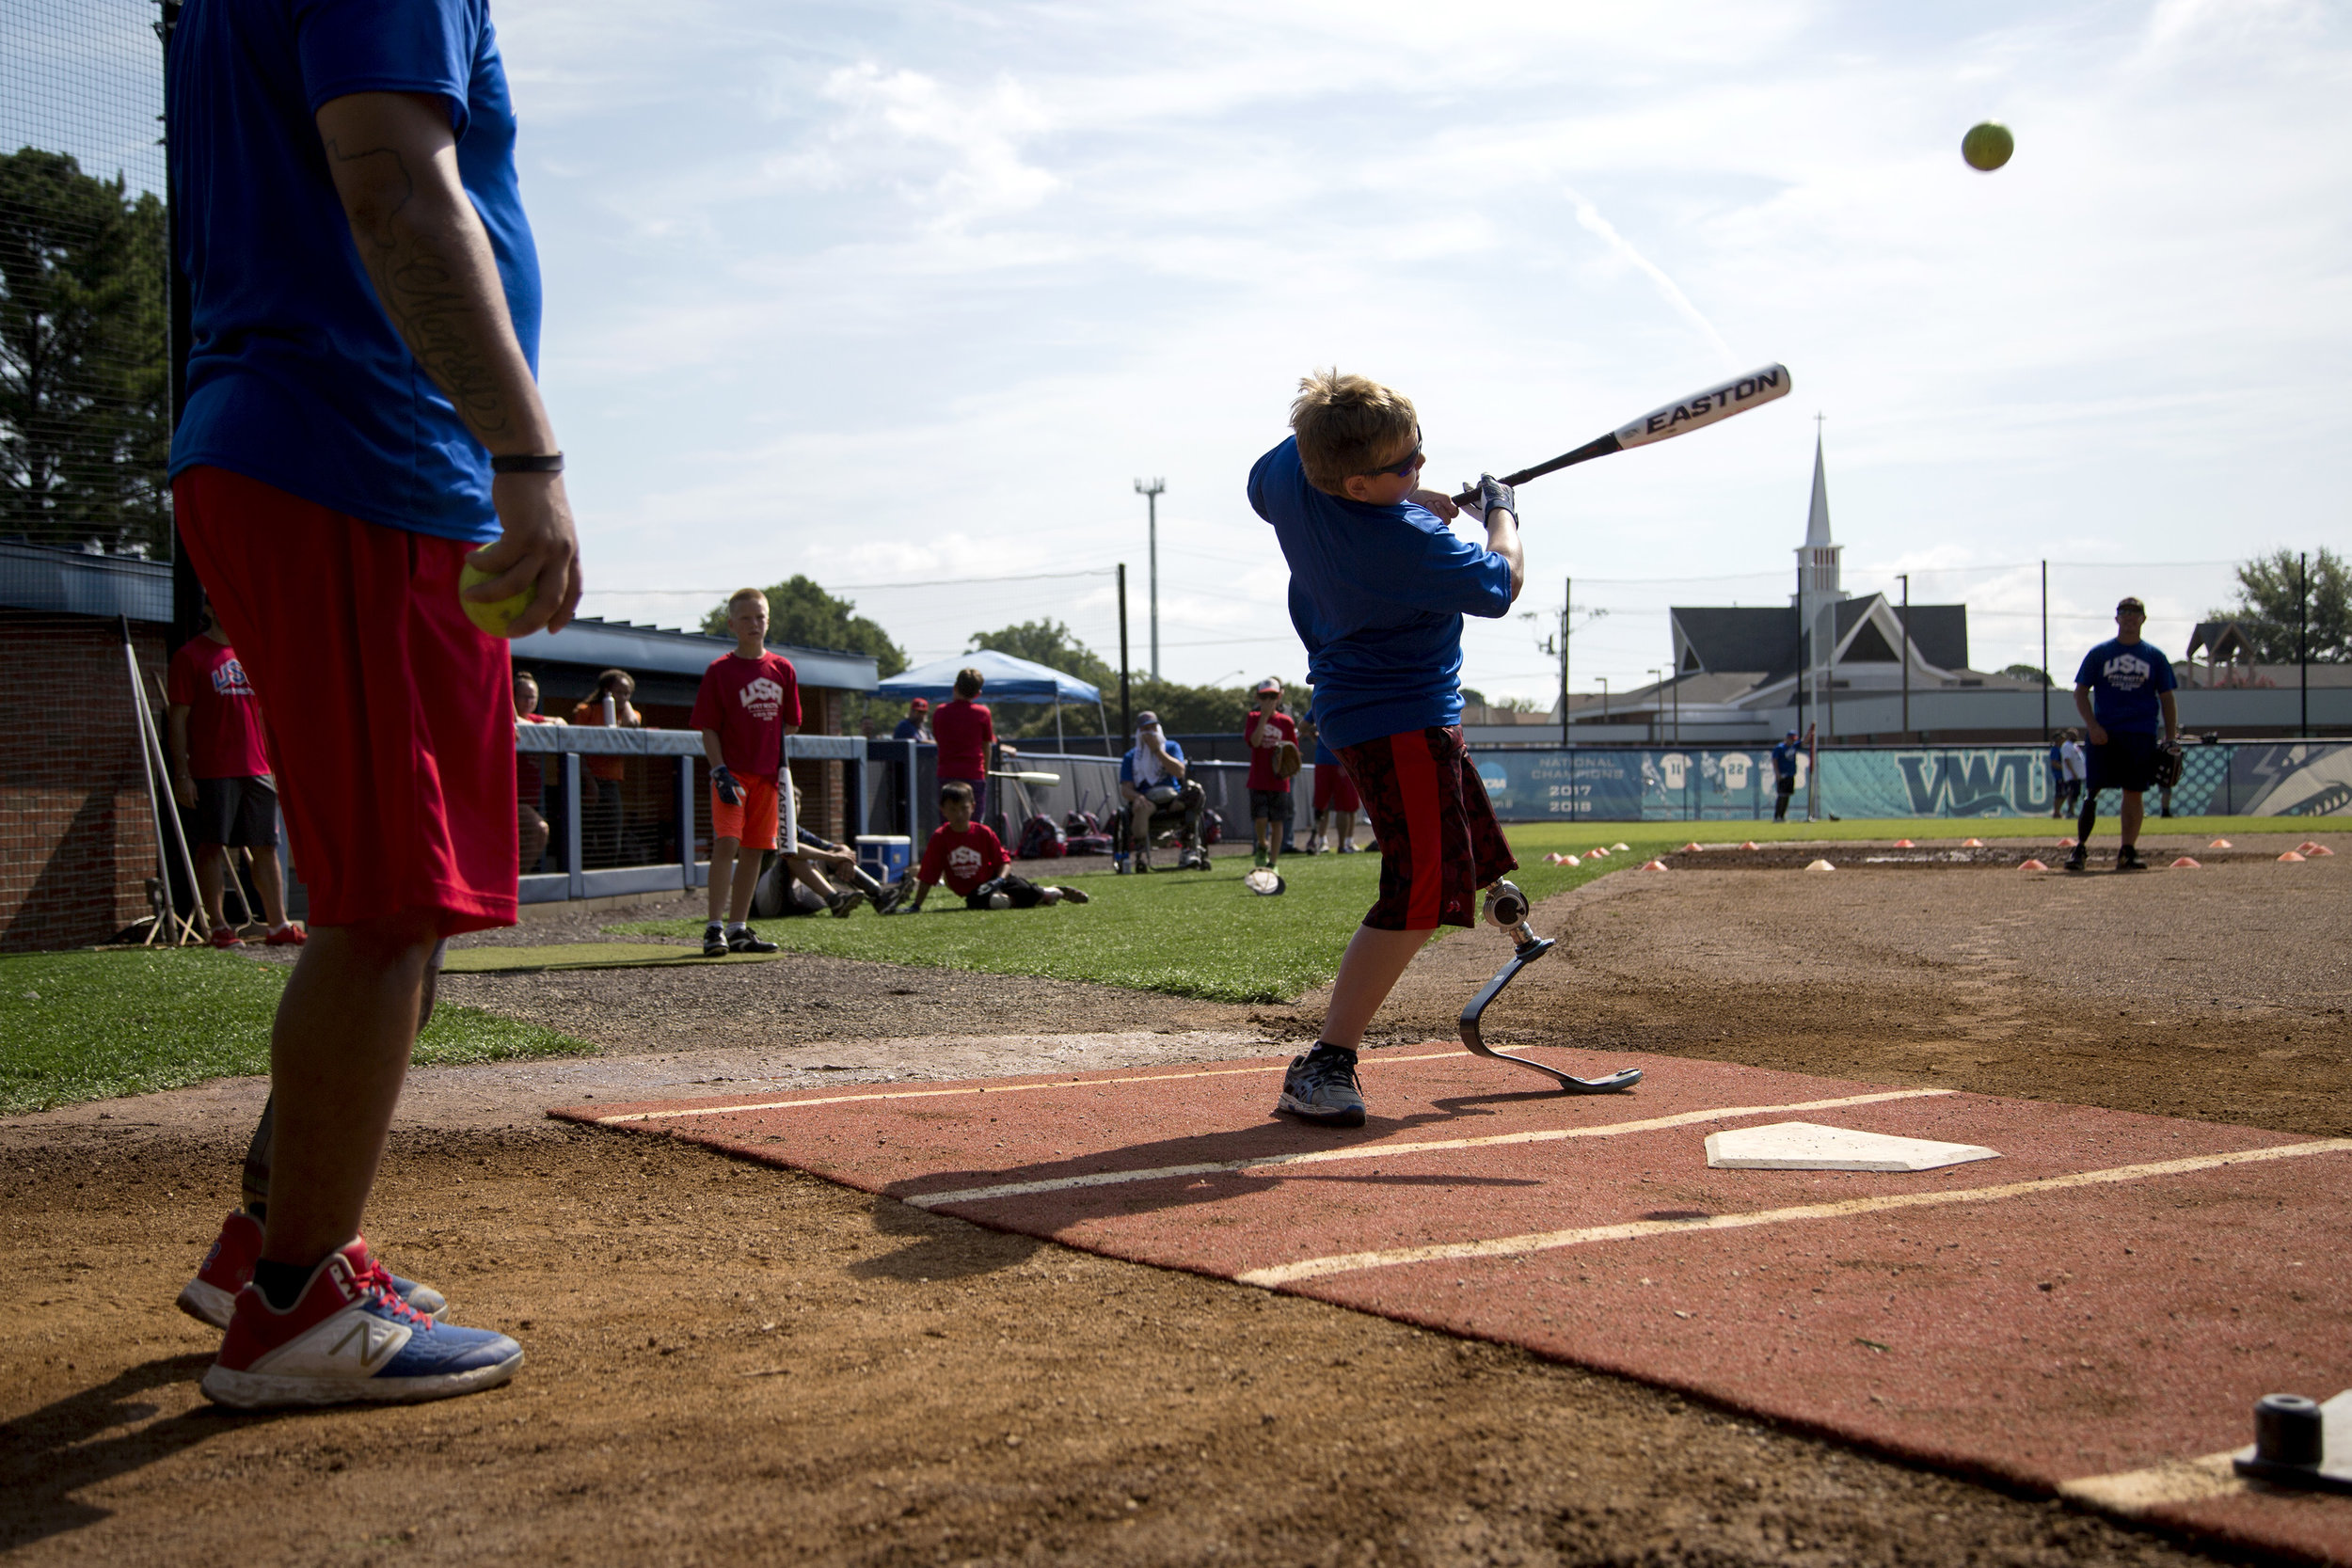  Landon Uthke, 11, from Minnesota, strikes the ball during batting practice during the seventh annual Kids Camp, hosted by the USA Patriots Amputee Softball Team at Virginia Wesleyan University on August 1, 2019. The team has flown in 17 kids, ages 8